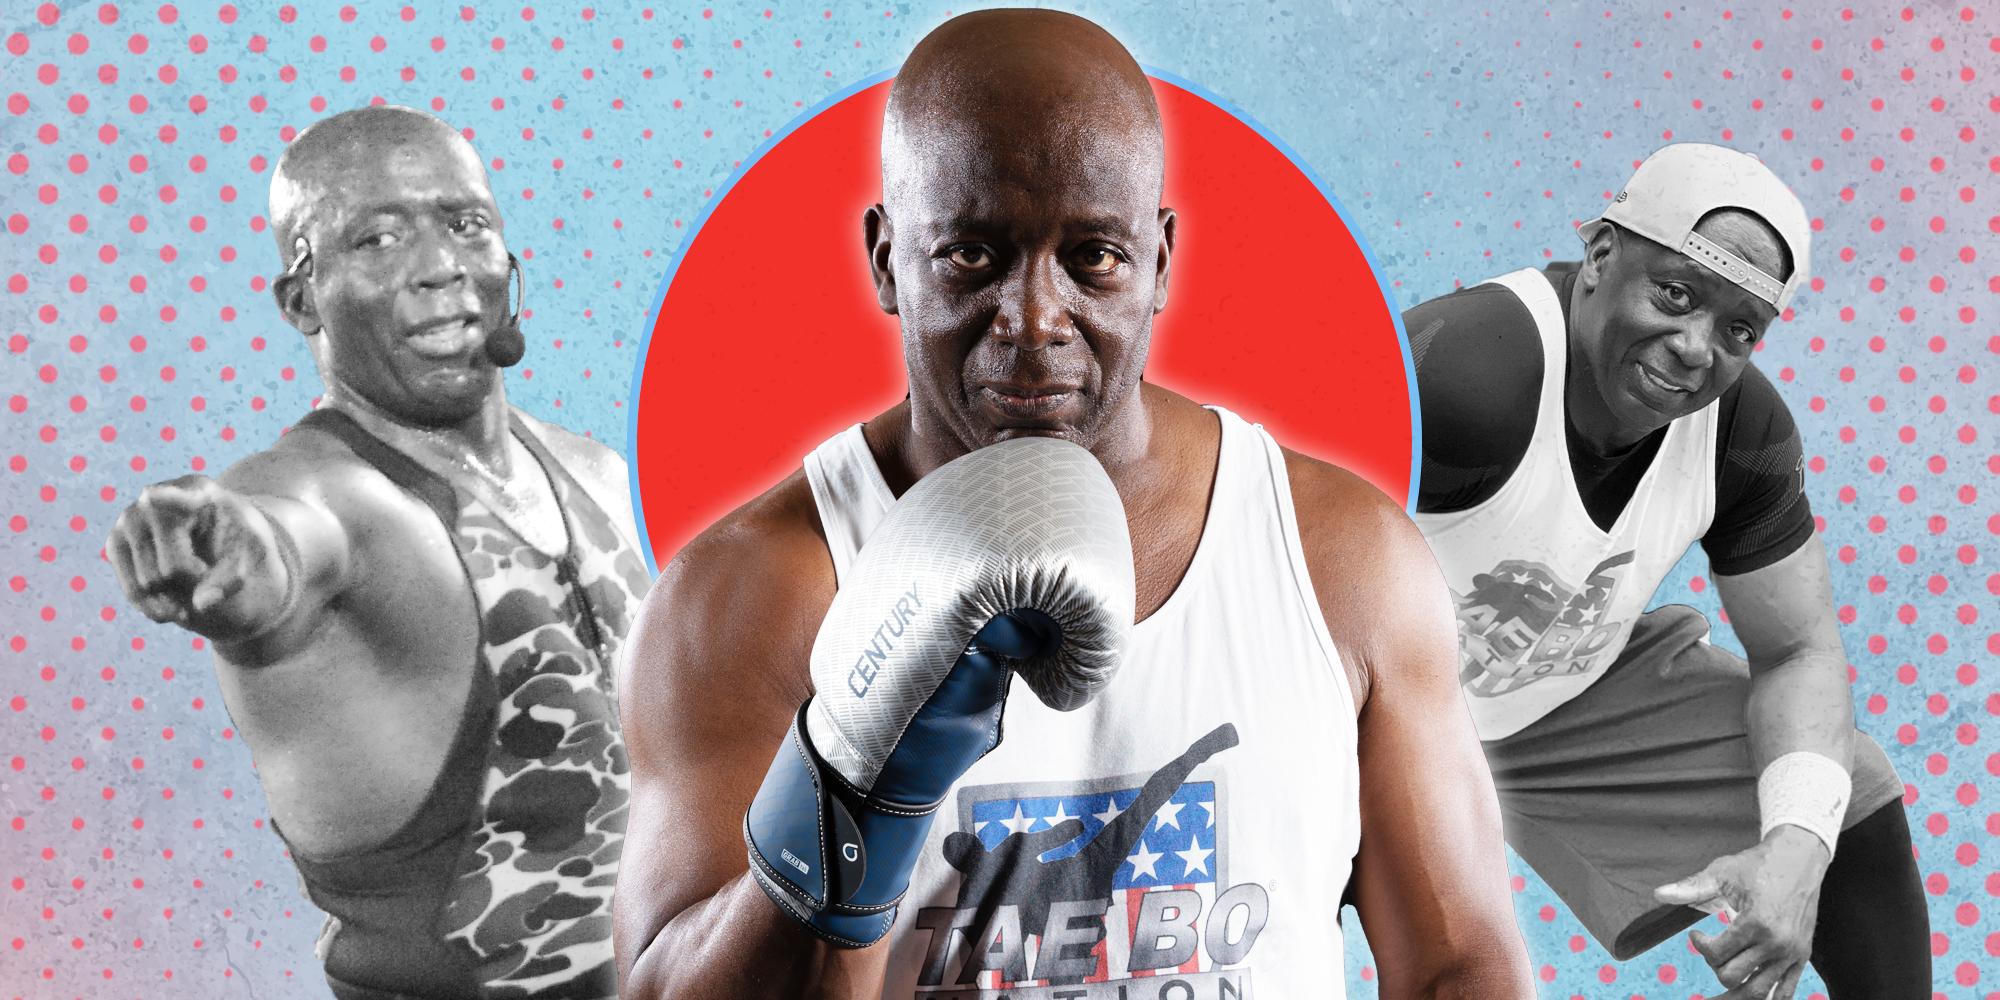 Billy Blanks on How Tae Bo Made a YouTube Comeback During Covid